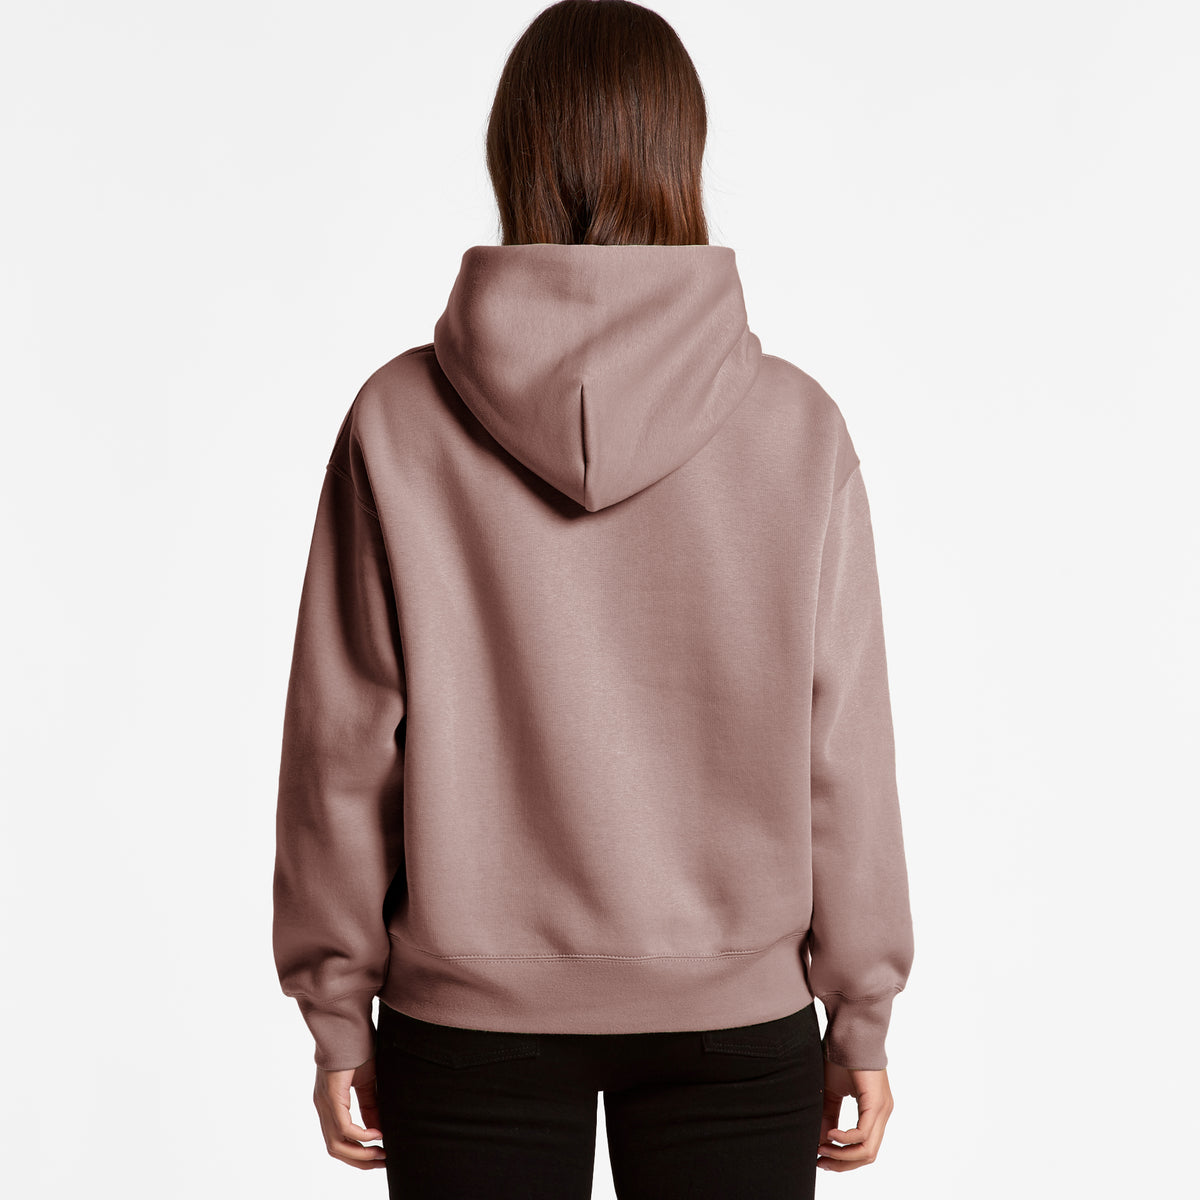 Protect our Pollinators - Women&#39;s Heavyweight Relaxed Hoodie